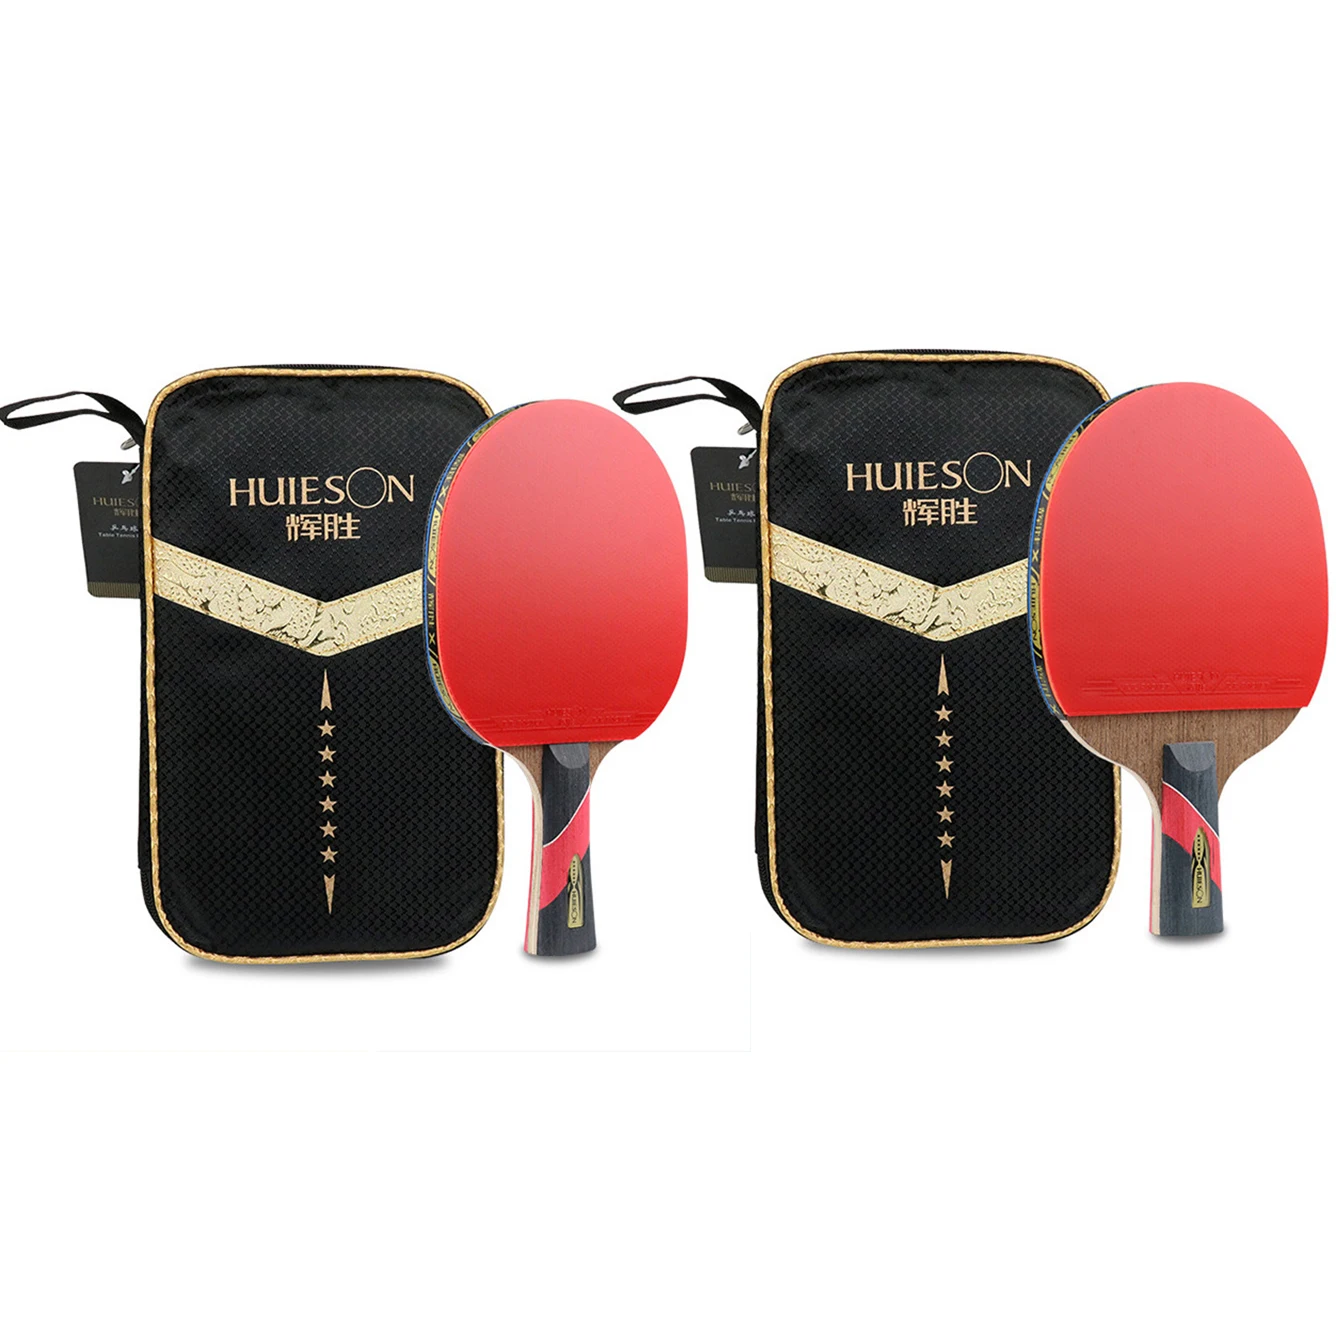 

Huieson Super Powerful Ping Pong Racket Bat,6 Star Table Tennis Racket Sticky Pimples